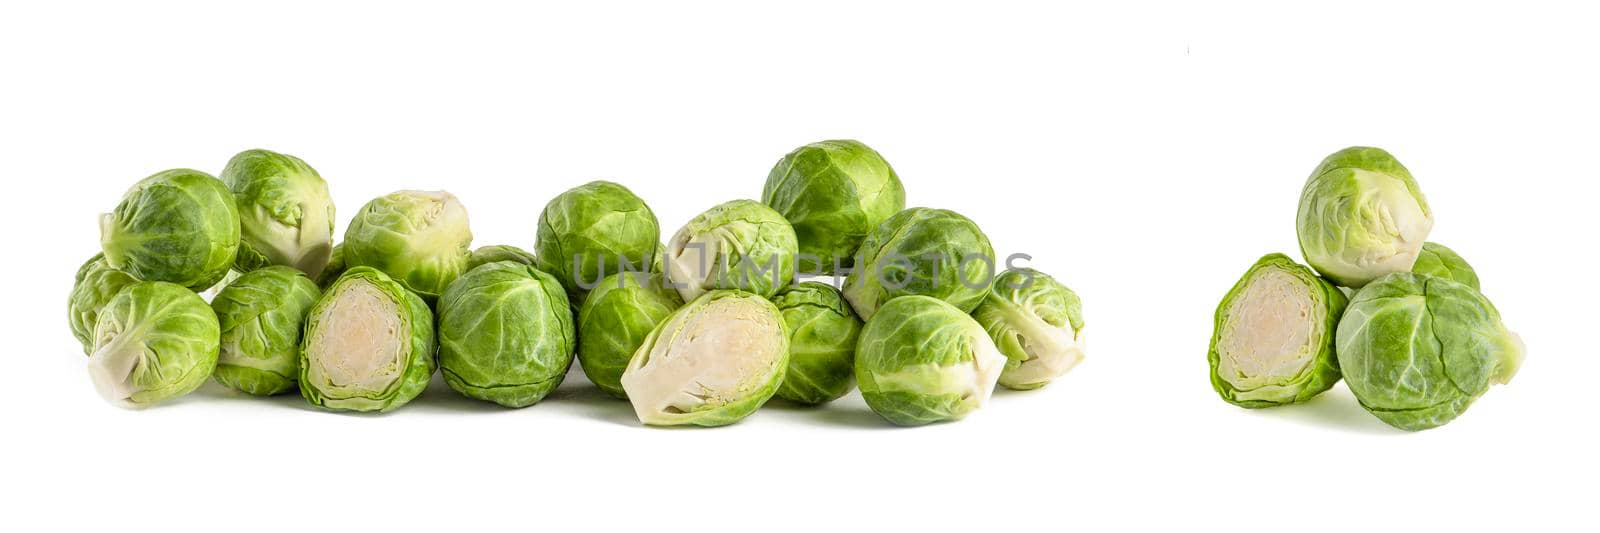 Brussels sprouts. Set of fresh brussels sprouts in stacks on white isolated background. Deep focus stacking. by SERSOL